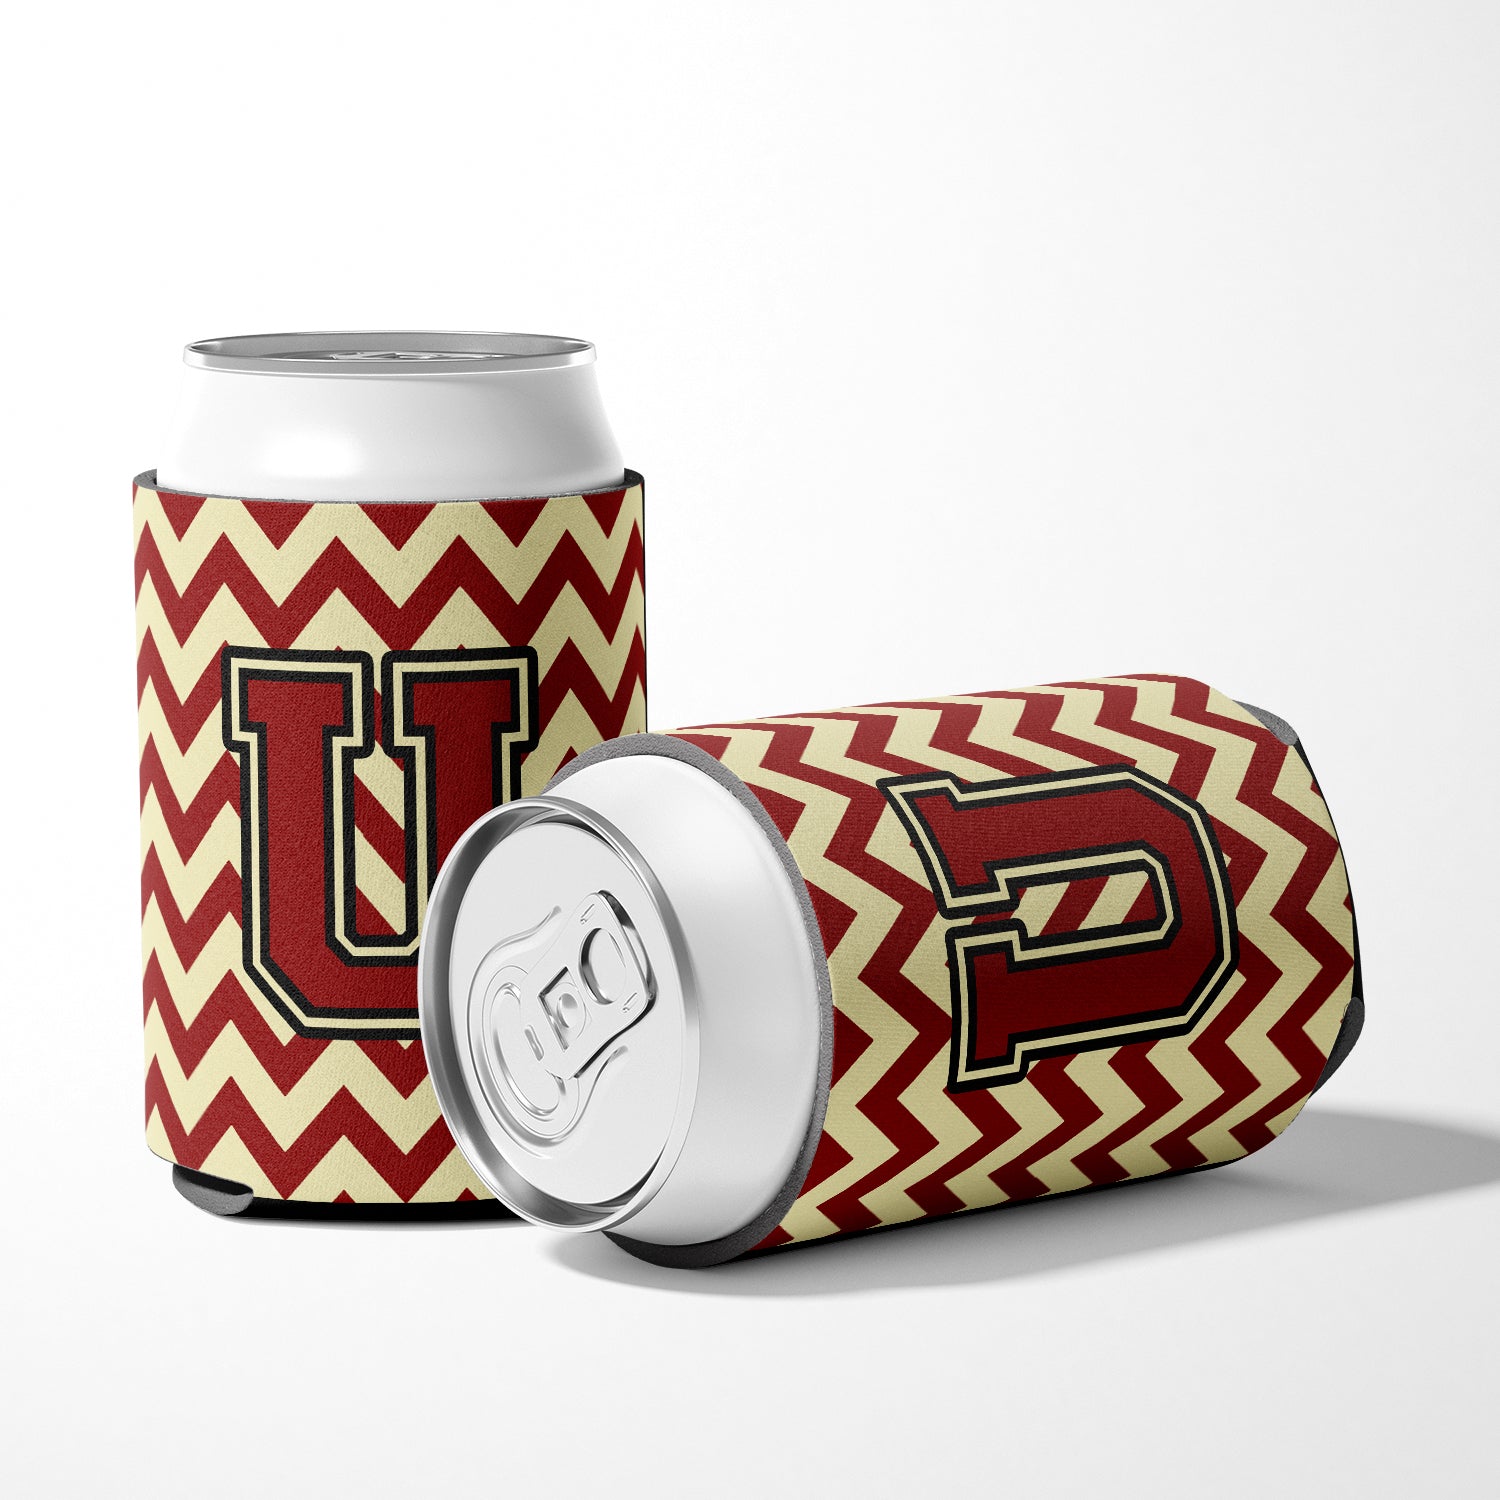 Letter U Chevron Maroon and Gold Can or Bottle Hugger CJ1061-UCC.